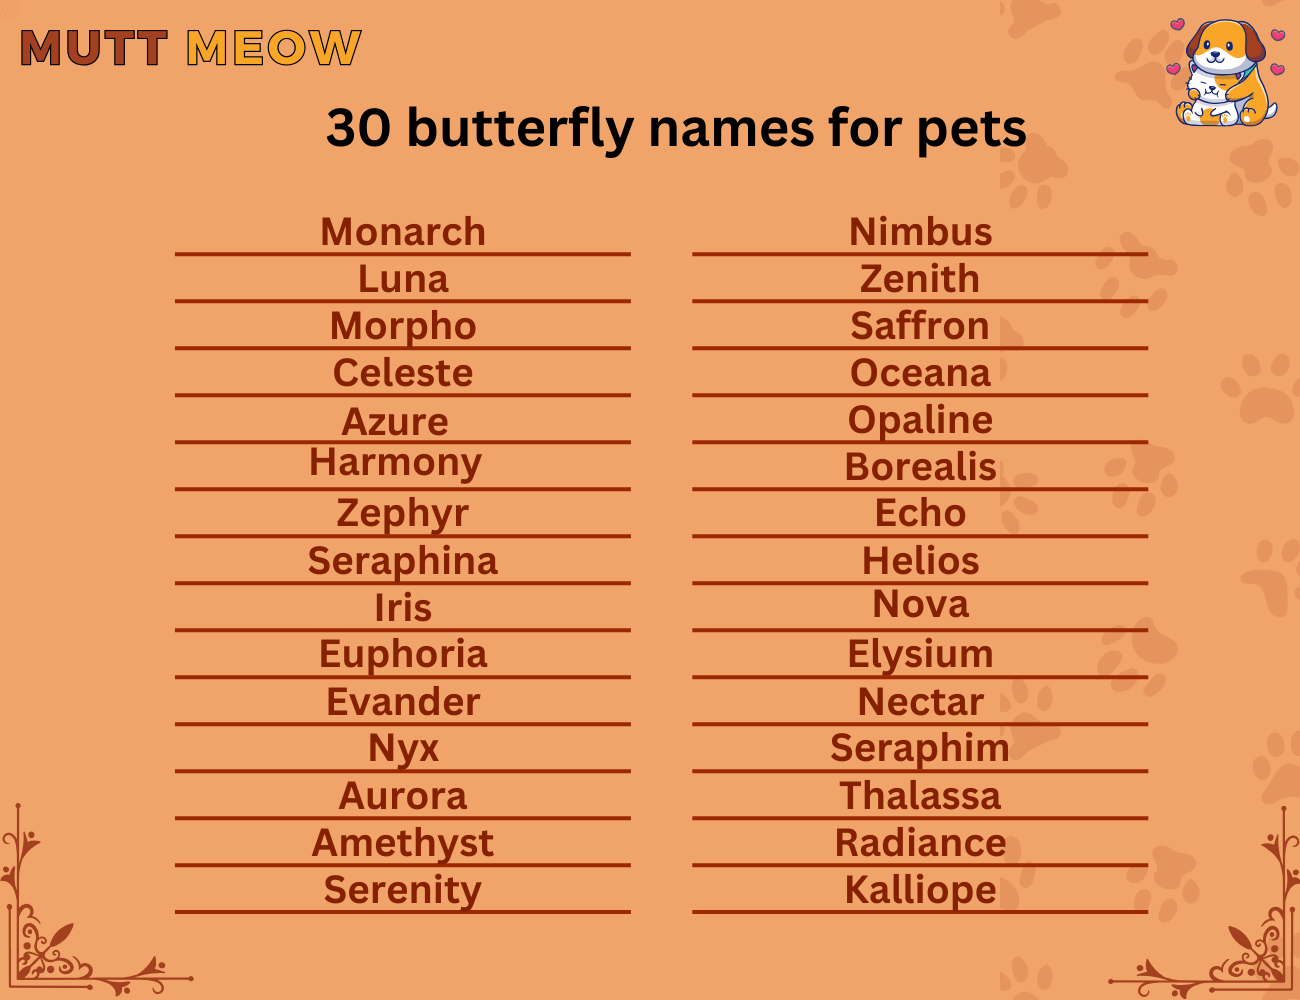 30 butterfly names for pets